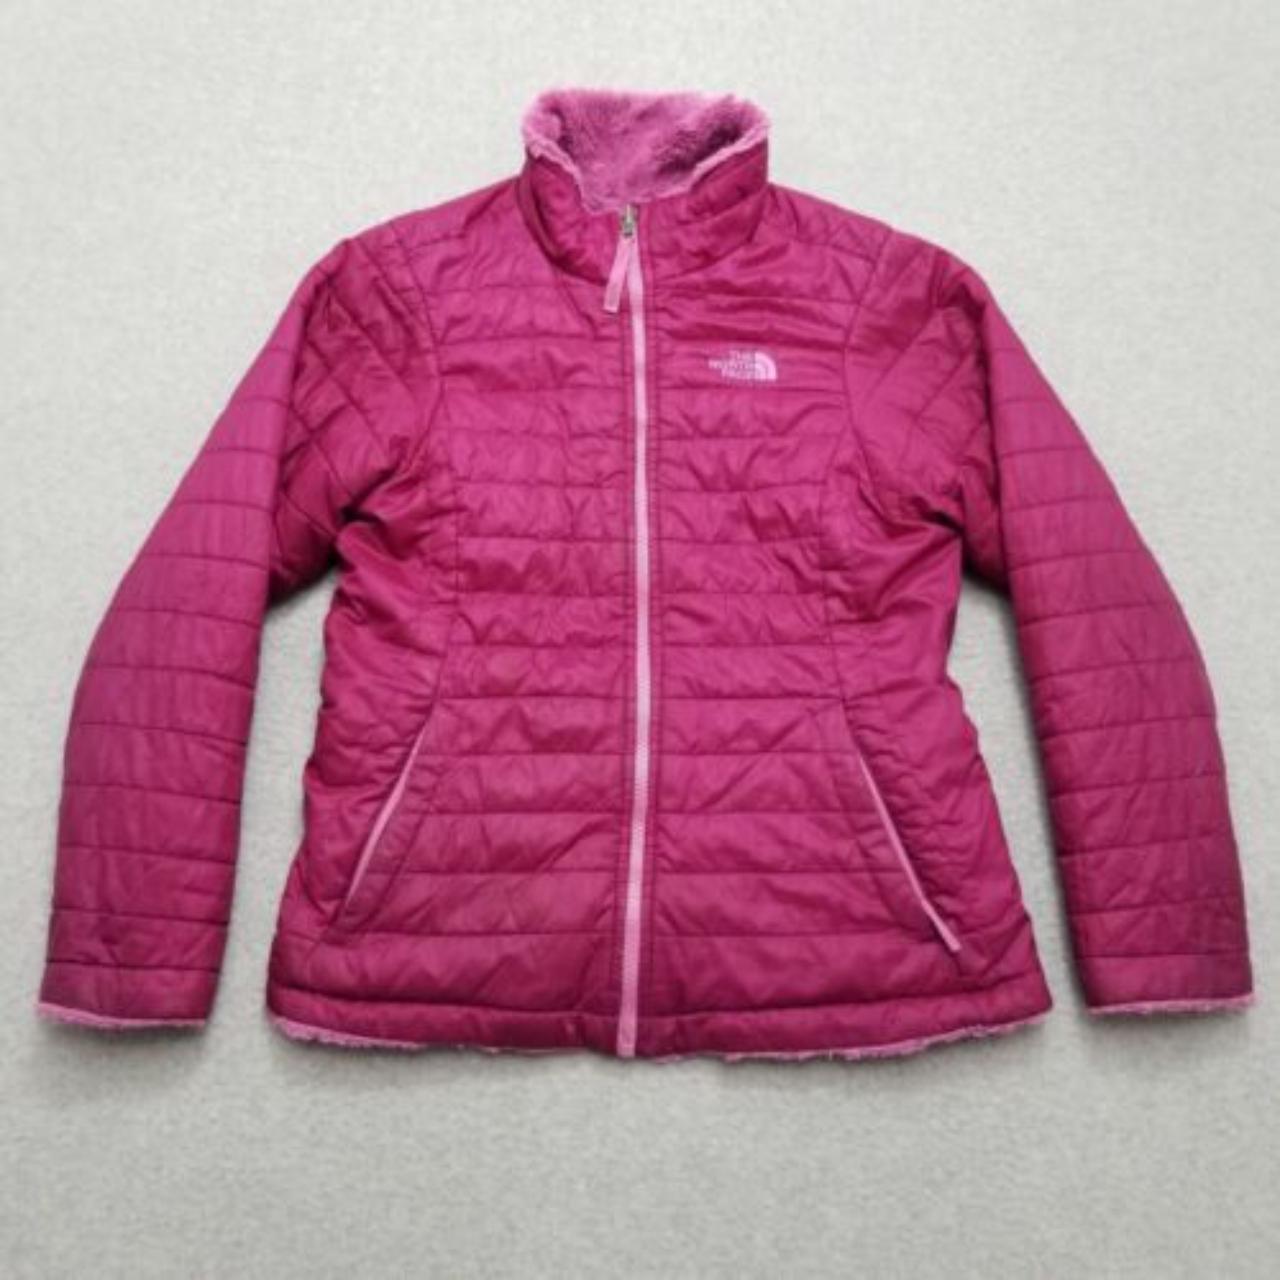 #The #North #Face #Jacket Youth Large Pink Full Zip... - Depop